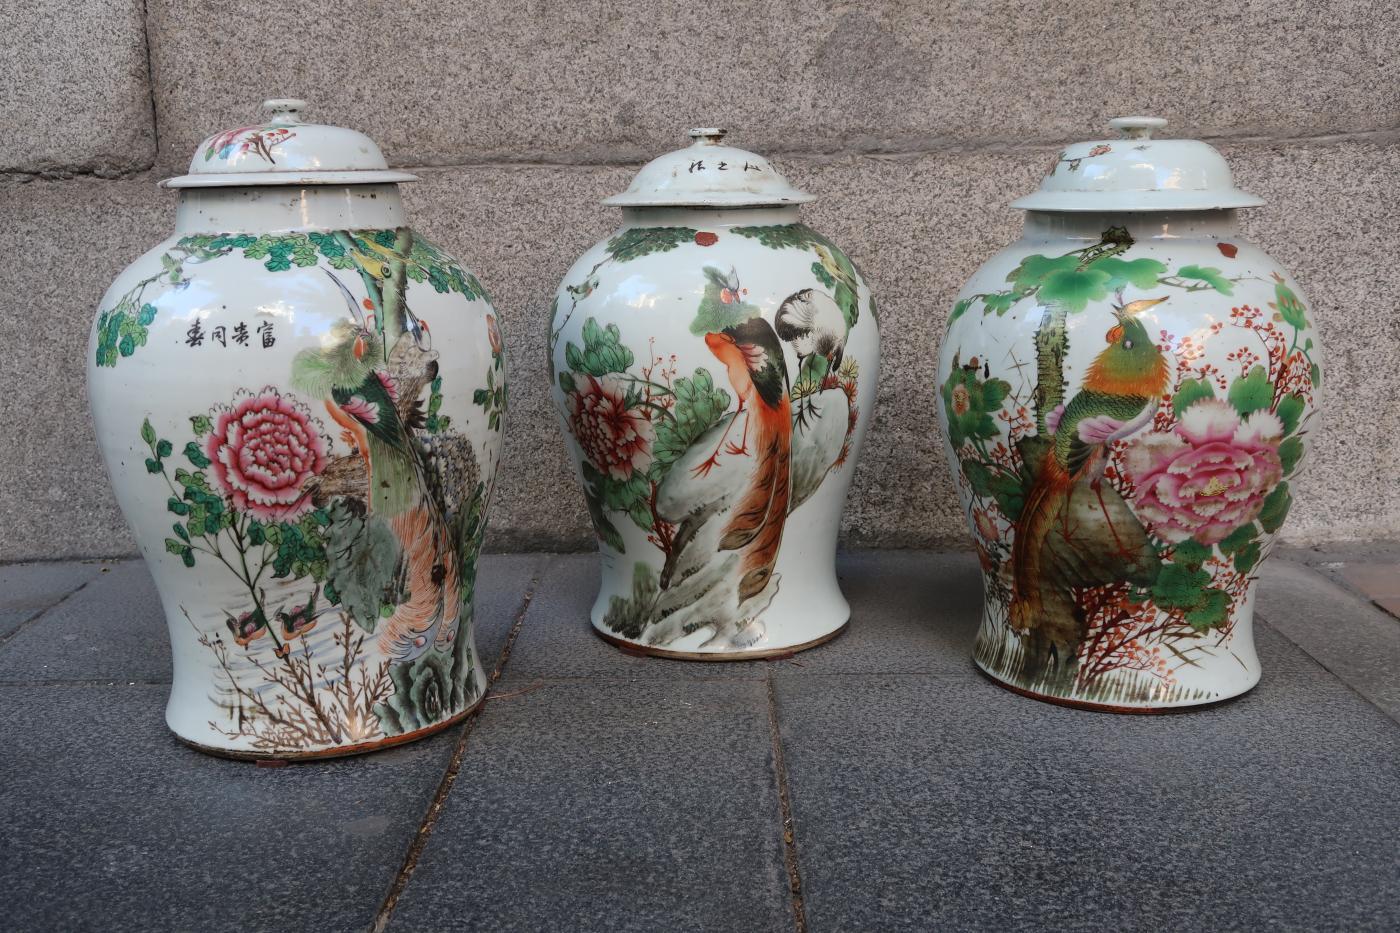 3 porcelain Chinese vases, early 20th century.